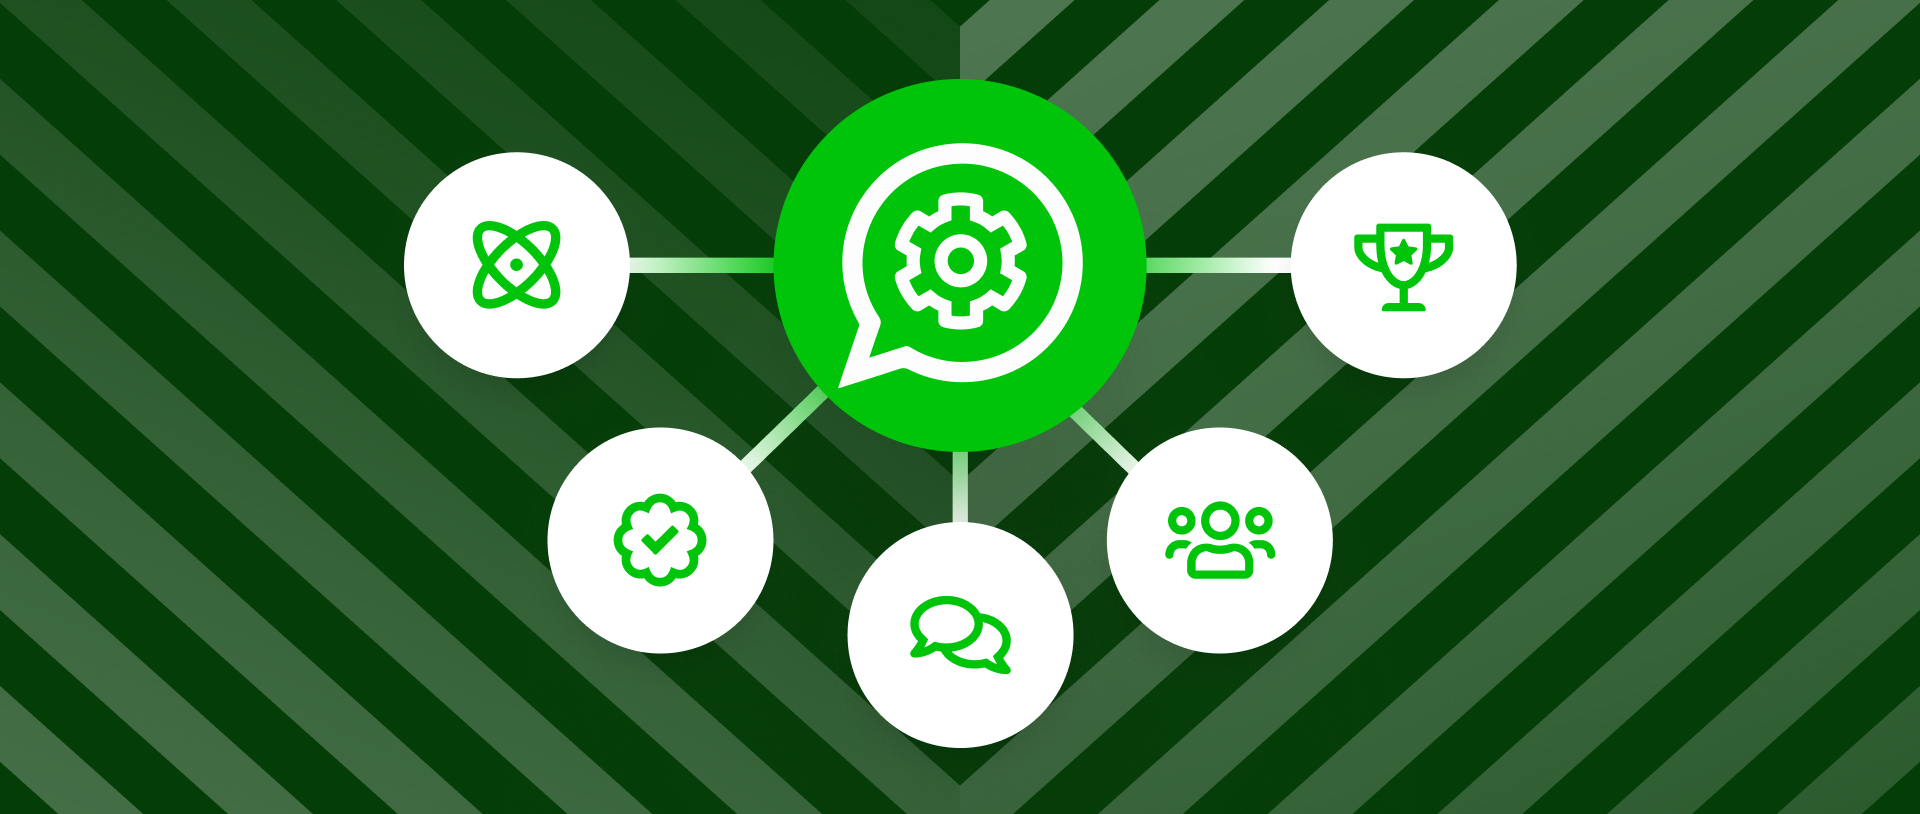 5 Functionalities to Make the Most of the WhatsApp API in your Business blog